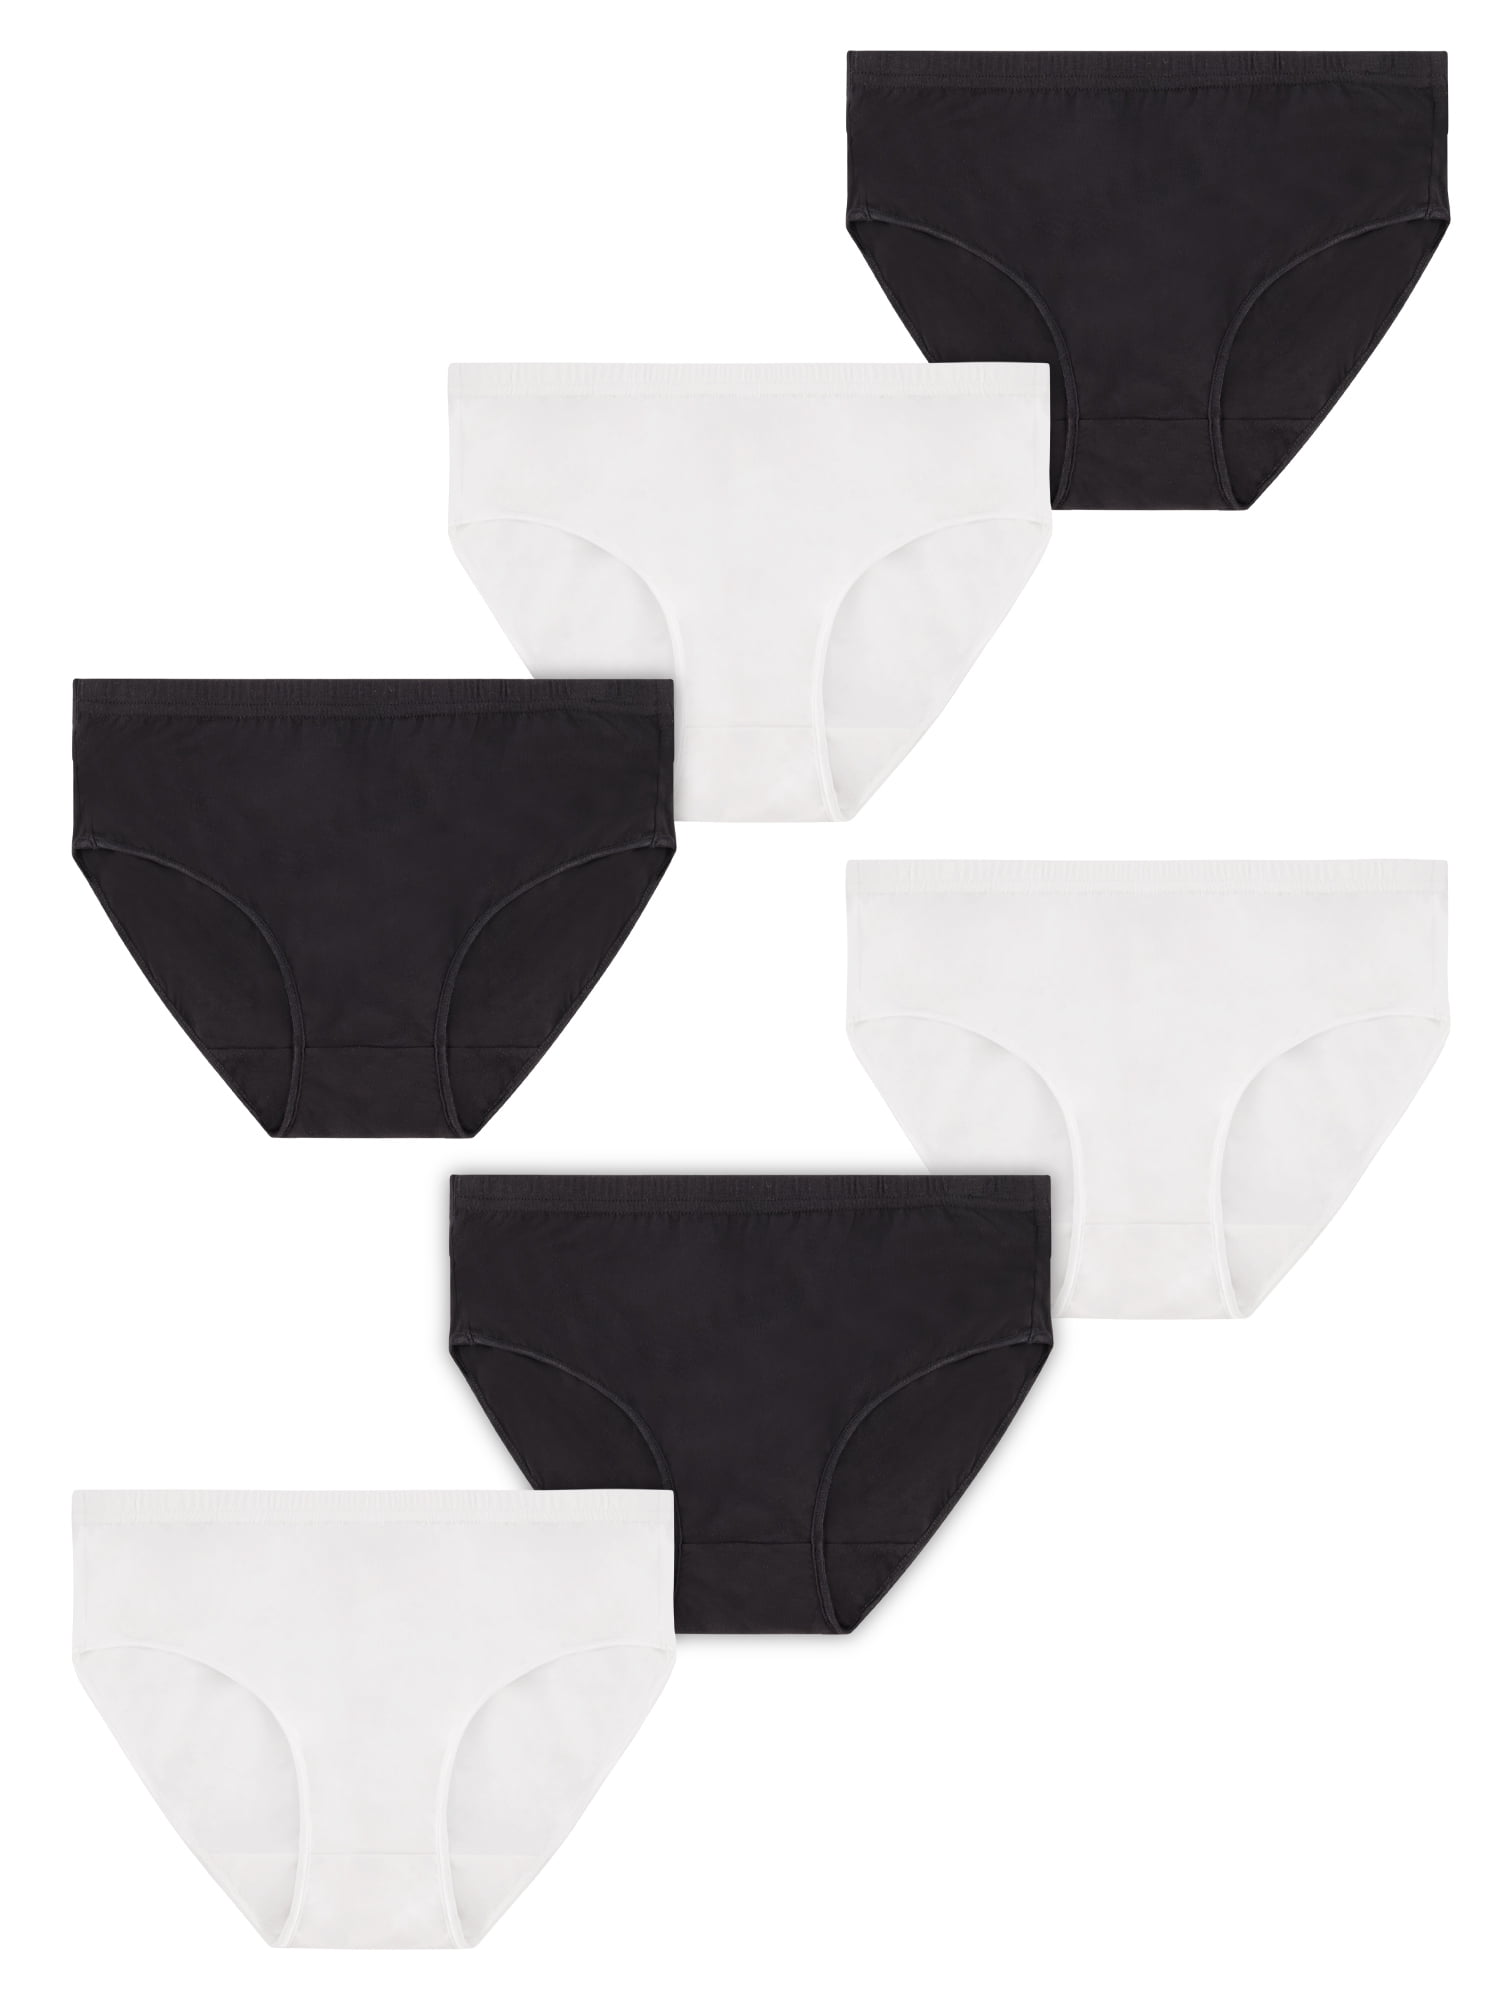 THE BEST FITTING PANTY - SMALL / 5 - NYLON STRETCH BEIGE / BLACK